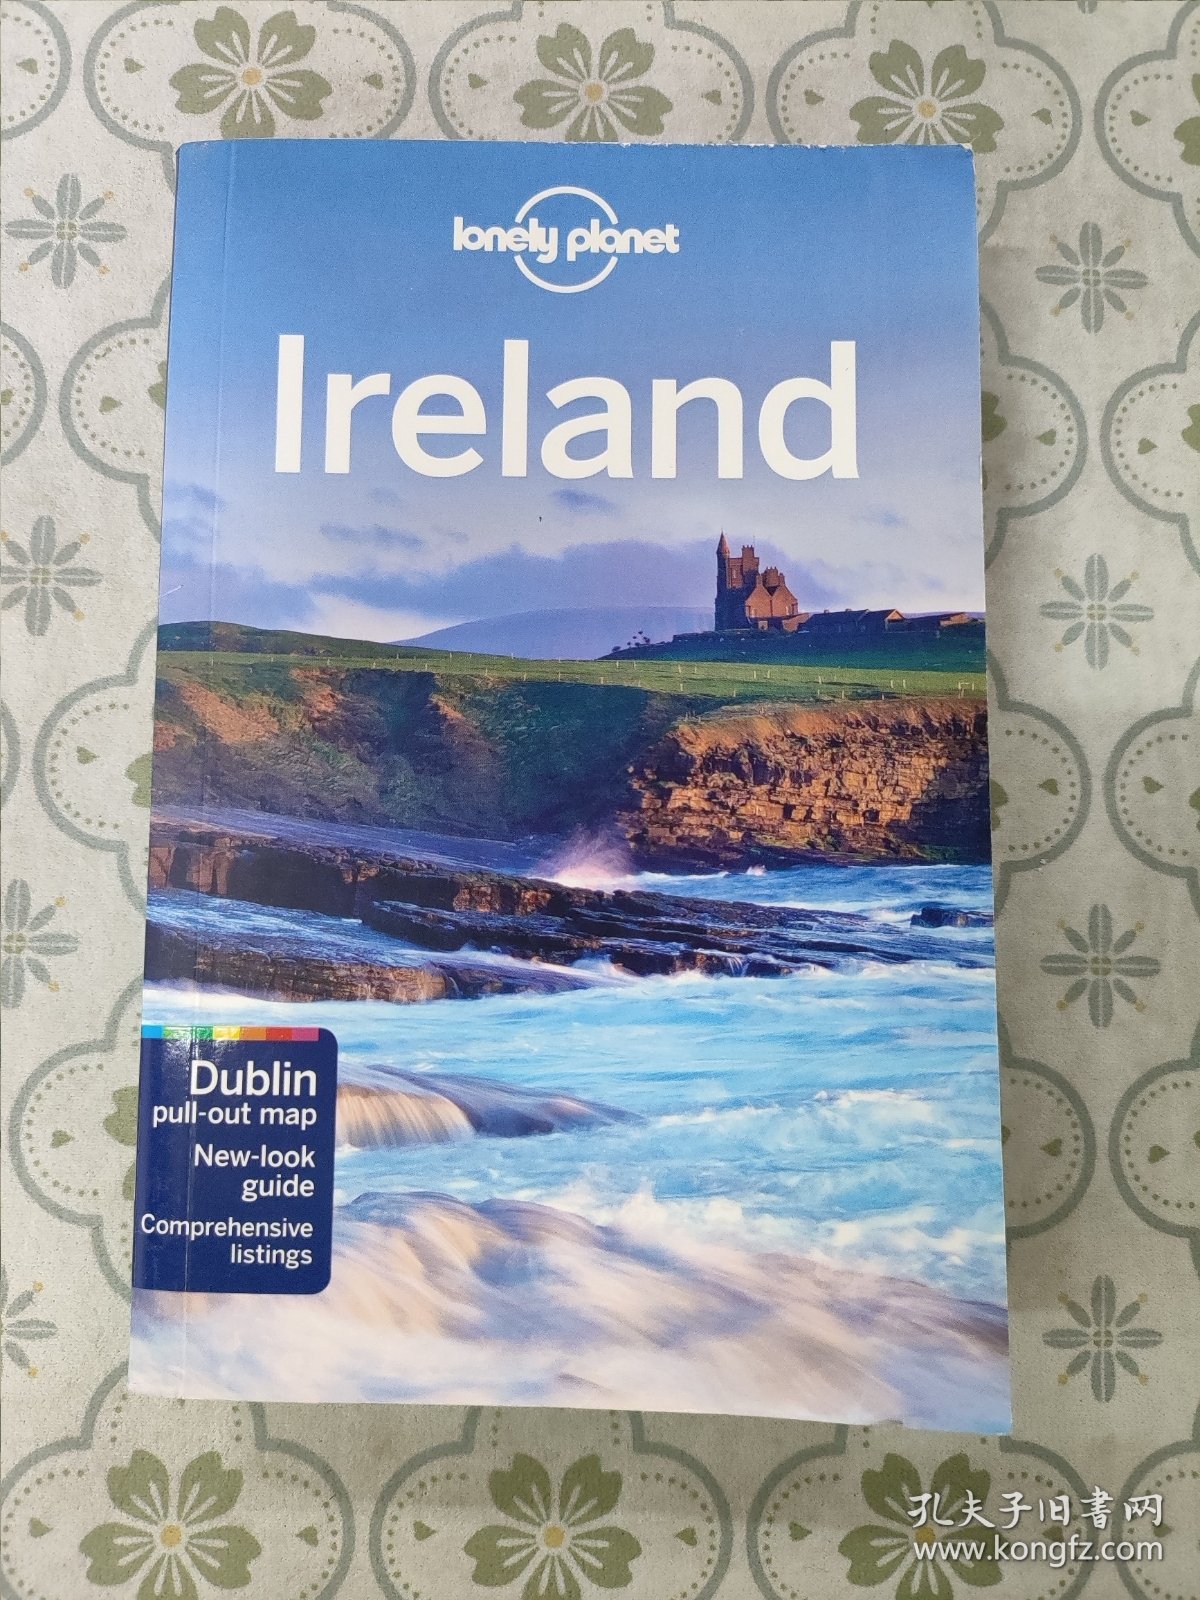 Lonely Planet: Ireland (Country Travel Guide)孤独星球旅行指南：爱尔兰